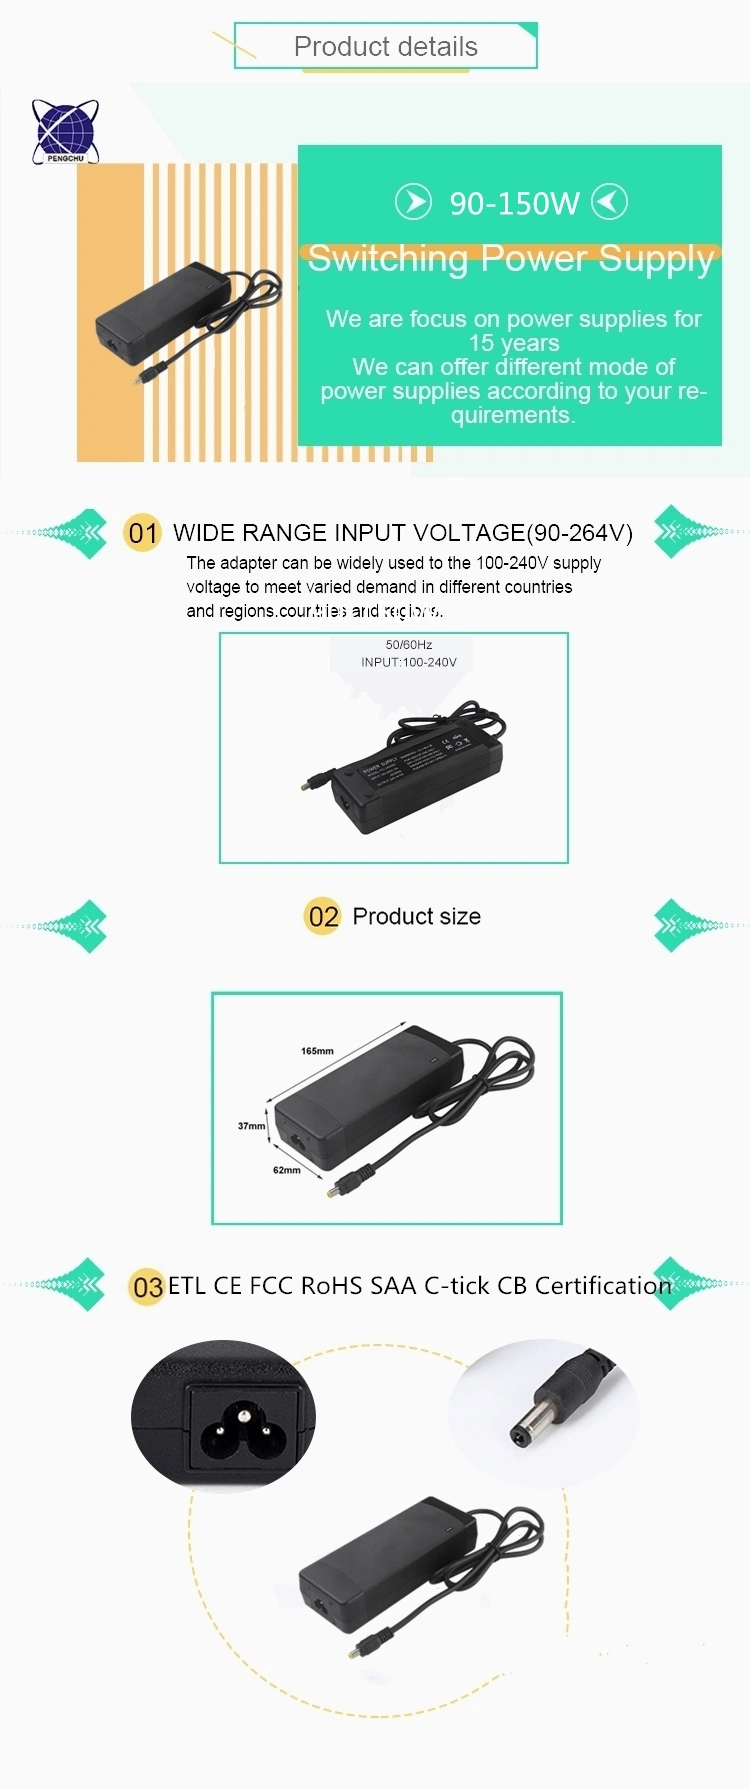 Desktop Switching Power Adapter 24V 5A 12V 10A 120W AC/DC Power Supply SMPS with UL ETL CE FCC RoHS SAA C-tick Approved